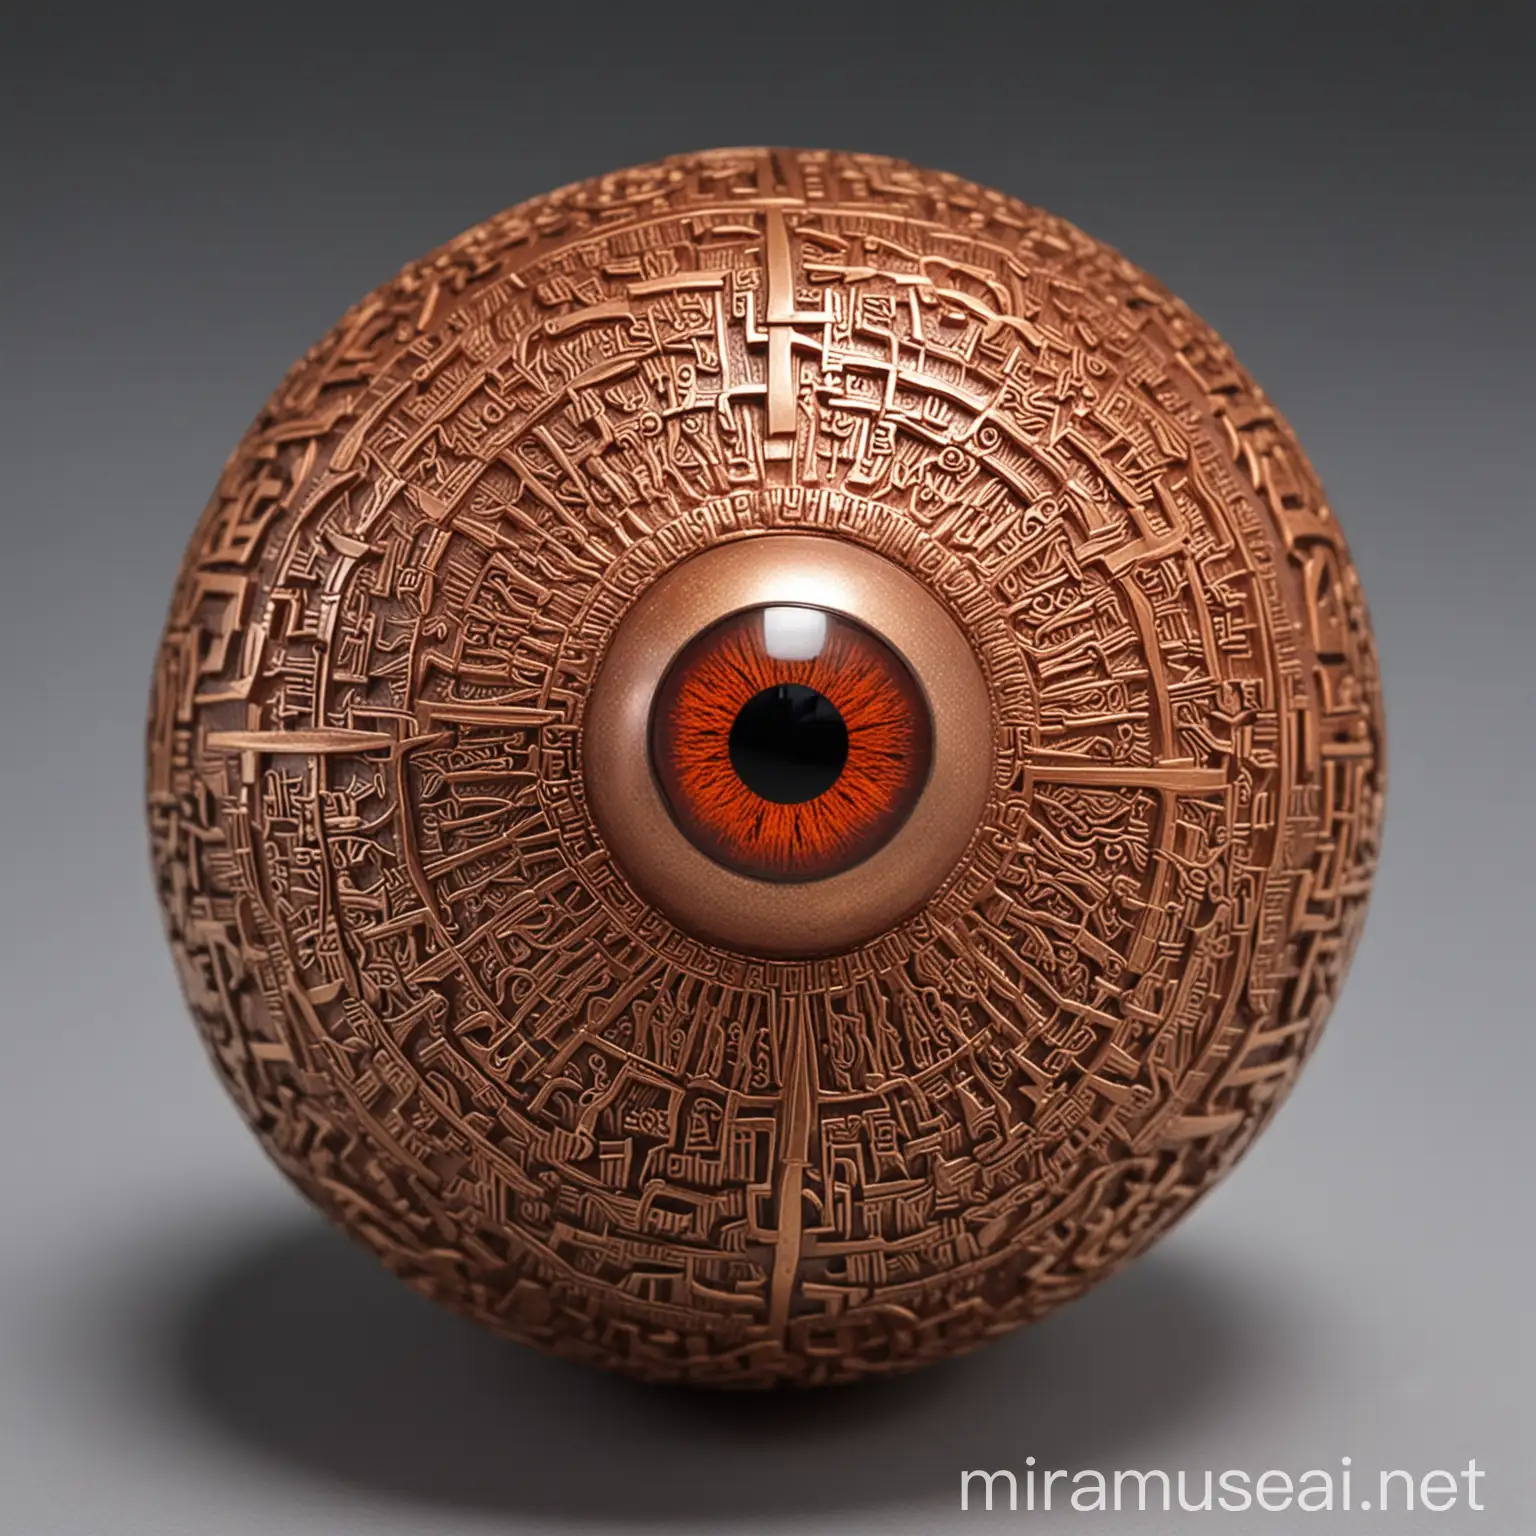 Intricately Engraved Red Copper Ball with Golden Gem Eye